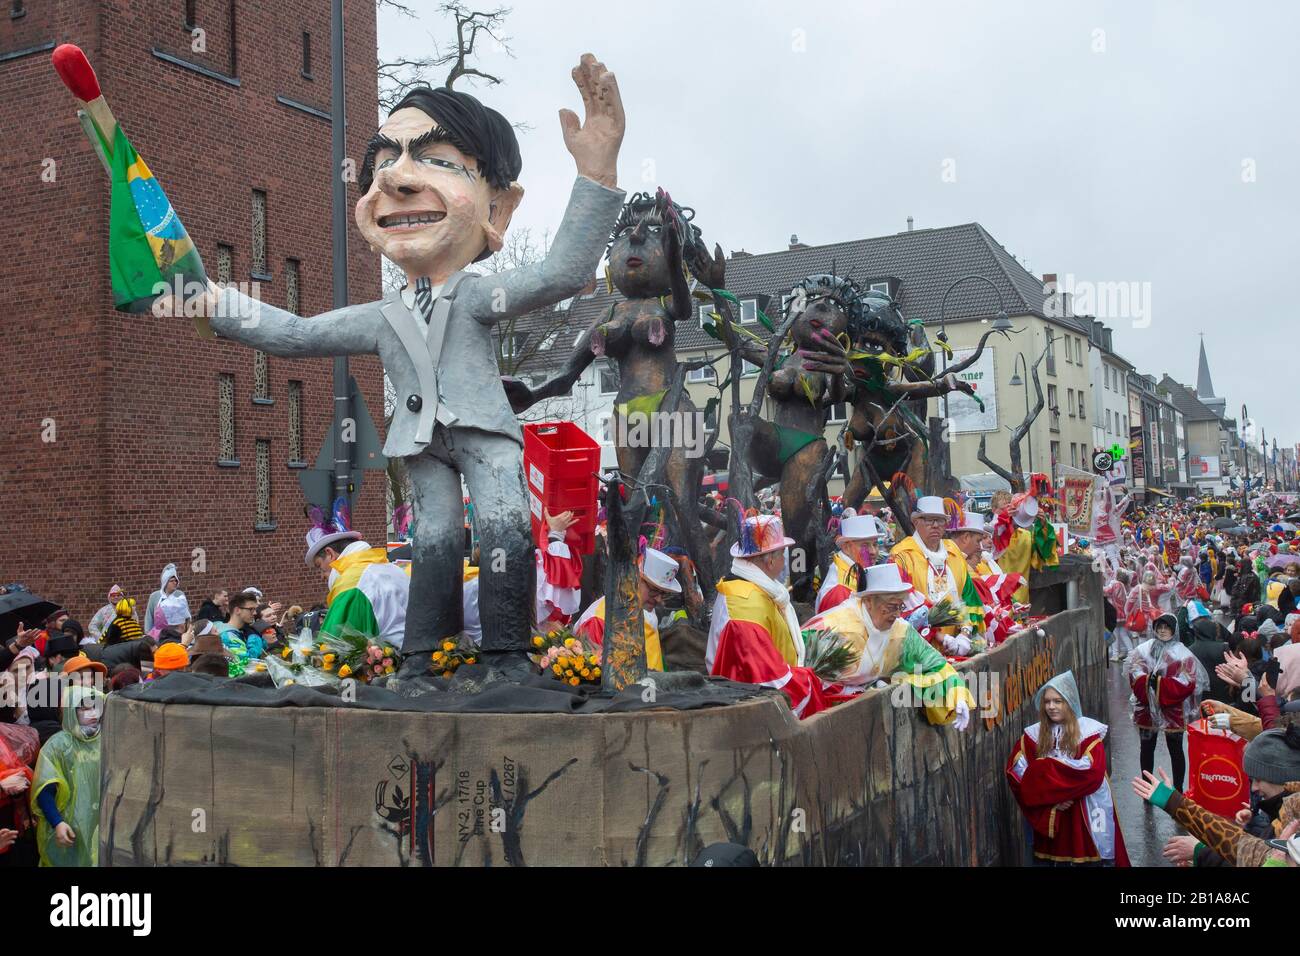 Carnival in Cologne: A carriage shows the Brazilian president Jair Bolsonaro, with burnt rainforest and charred samba dancers left behind Stock Photo